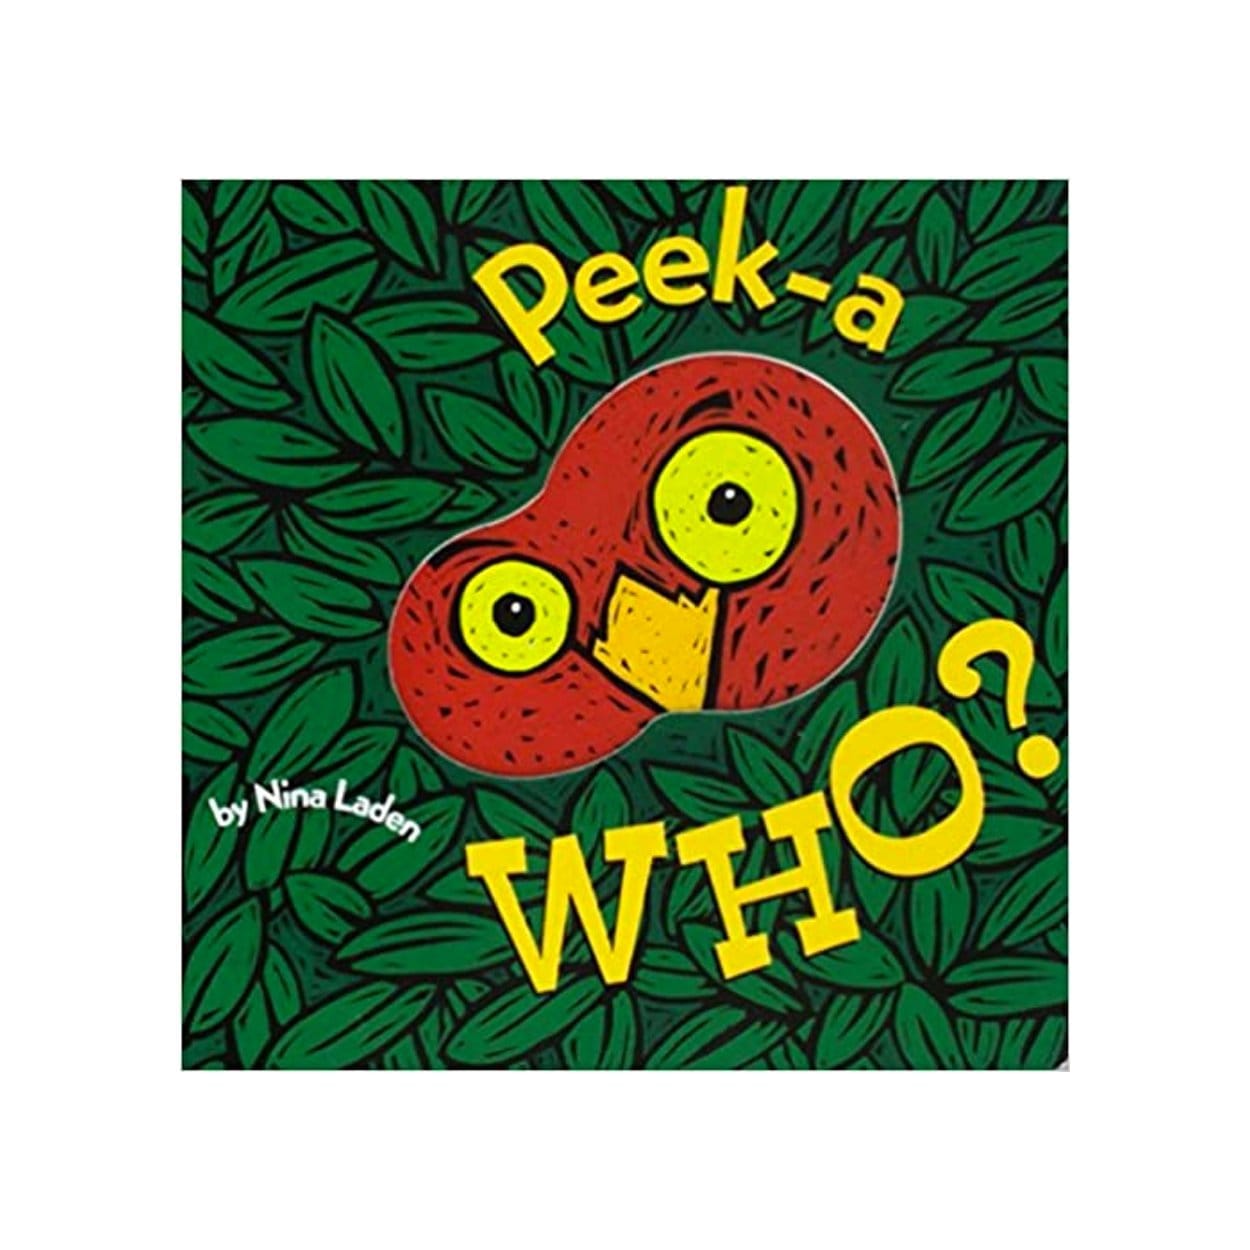 Peek-a-WHO? - The Montessori Room, Nina Laden, Toronto, Ontario, Canada, board books, children's books, baby books, infant books, first books, best gift for baby, baby registry ideas, bestselling children's books, interactive books